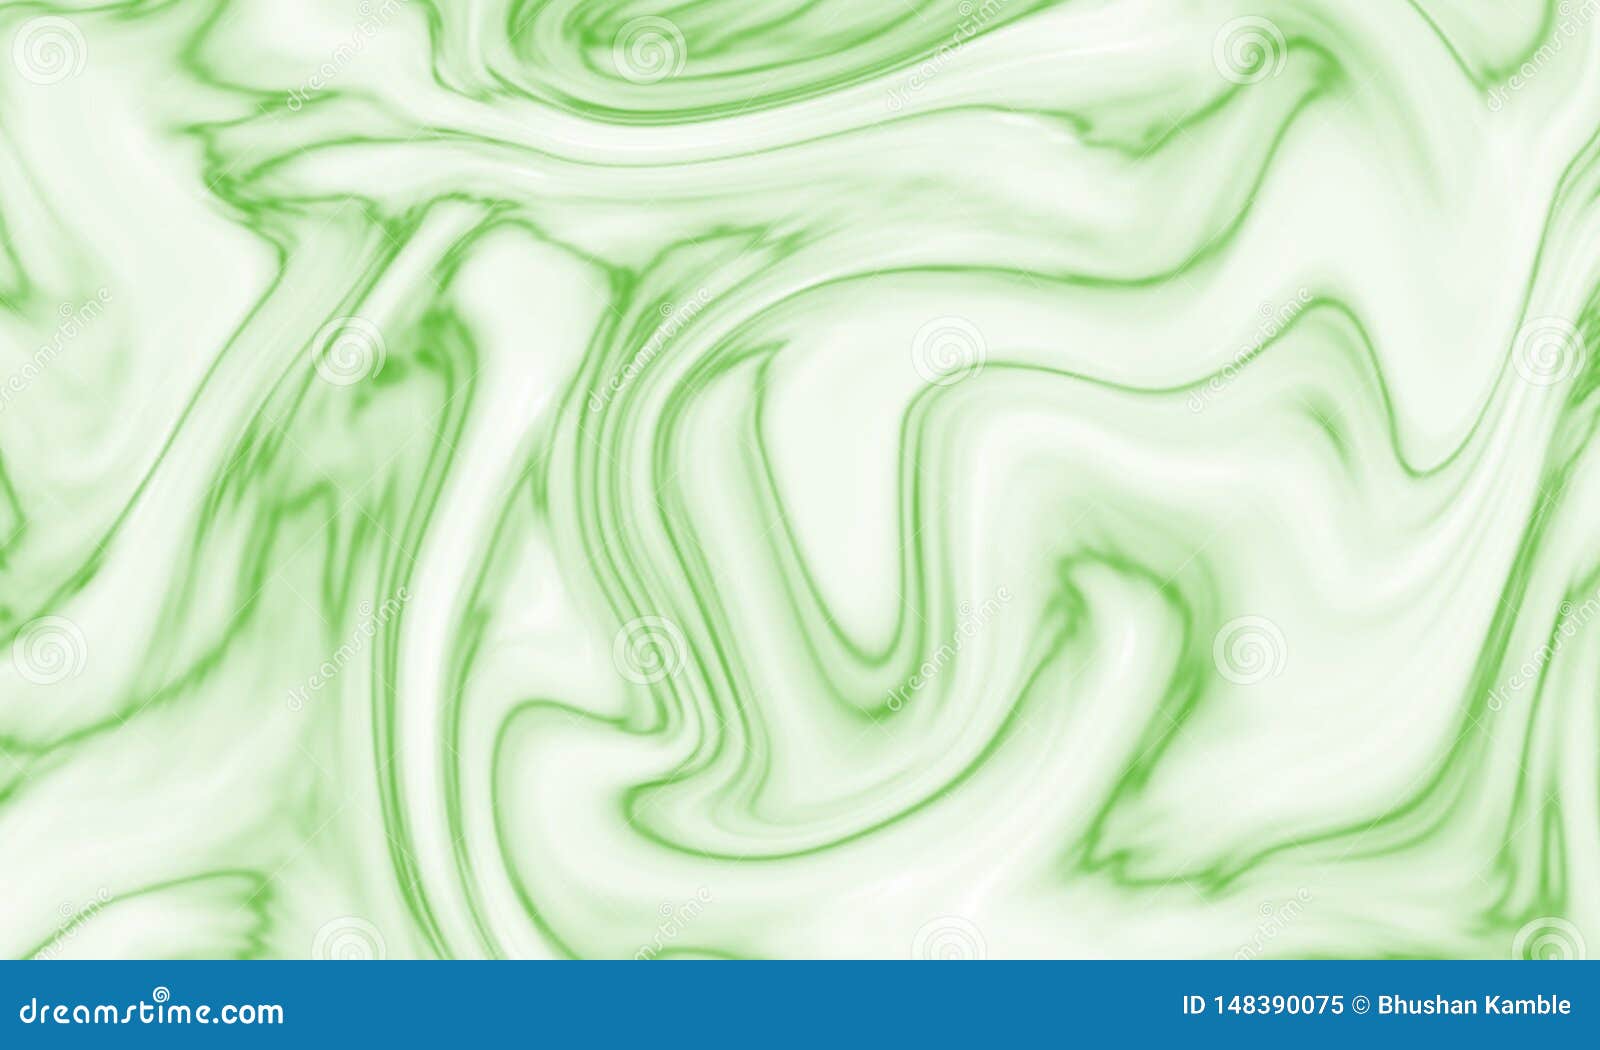 Green Marble Background Wallpaper Image Design 00 Stock Image Image Of Blue Card 148390075